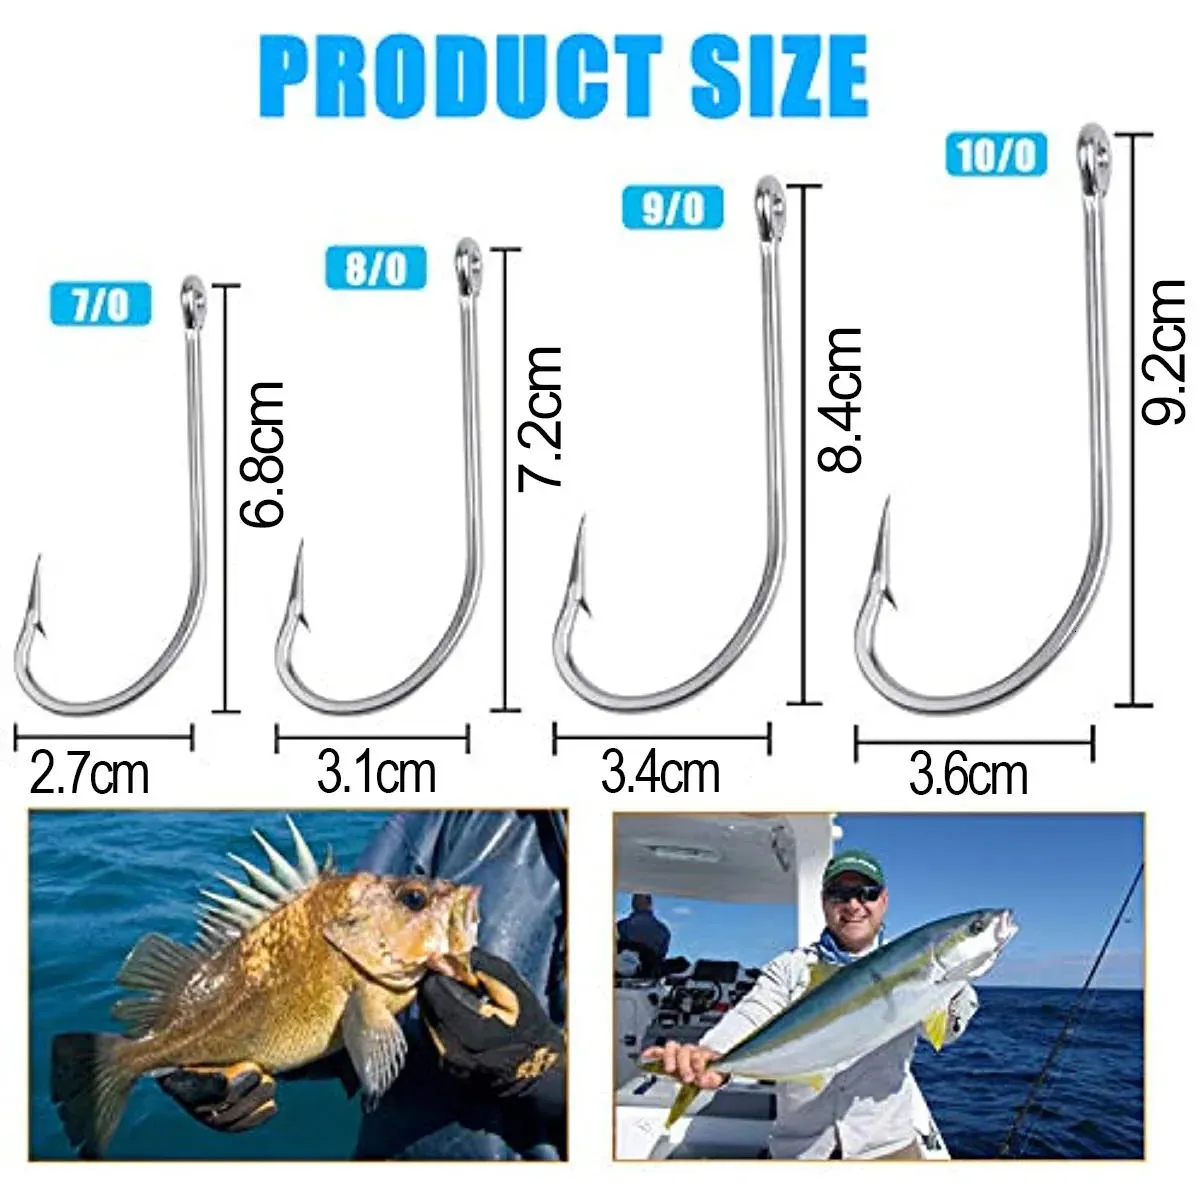 Long Shank Fishing Hooks Stainless Steel Big Game Fishhooks Size 1/0 2/0  3/0 4/0 5/0 6/0 7/0 8/0 9/0 10/0 240108 From Huo06, $15.22